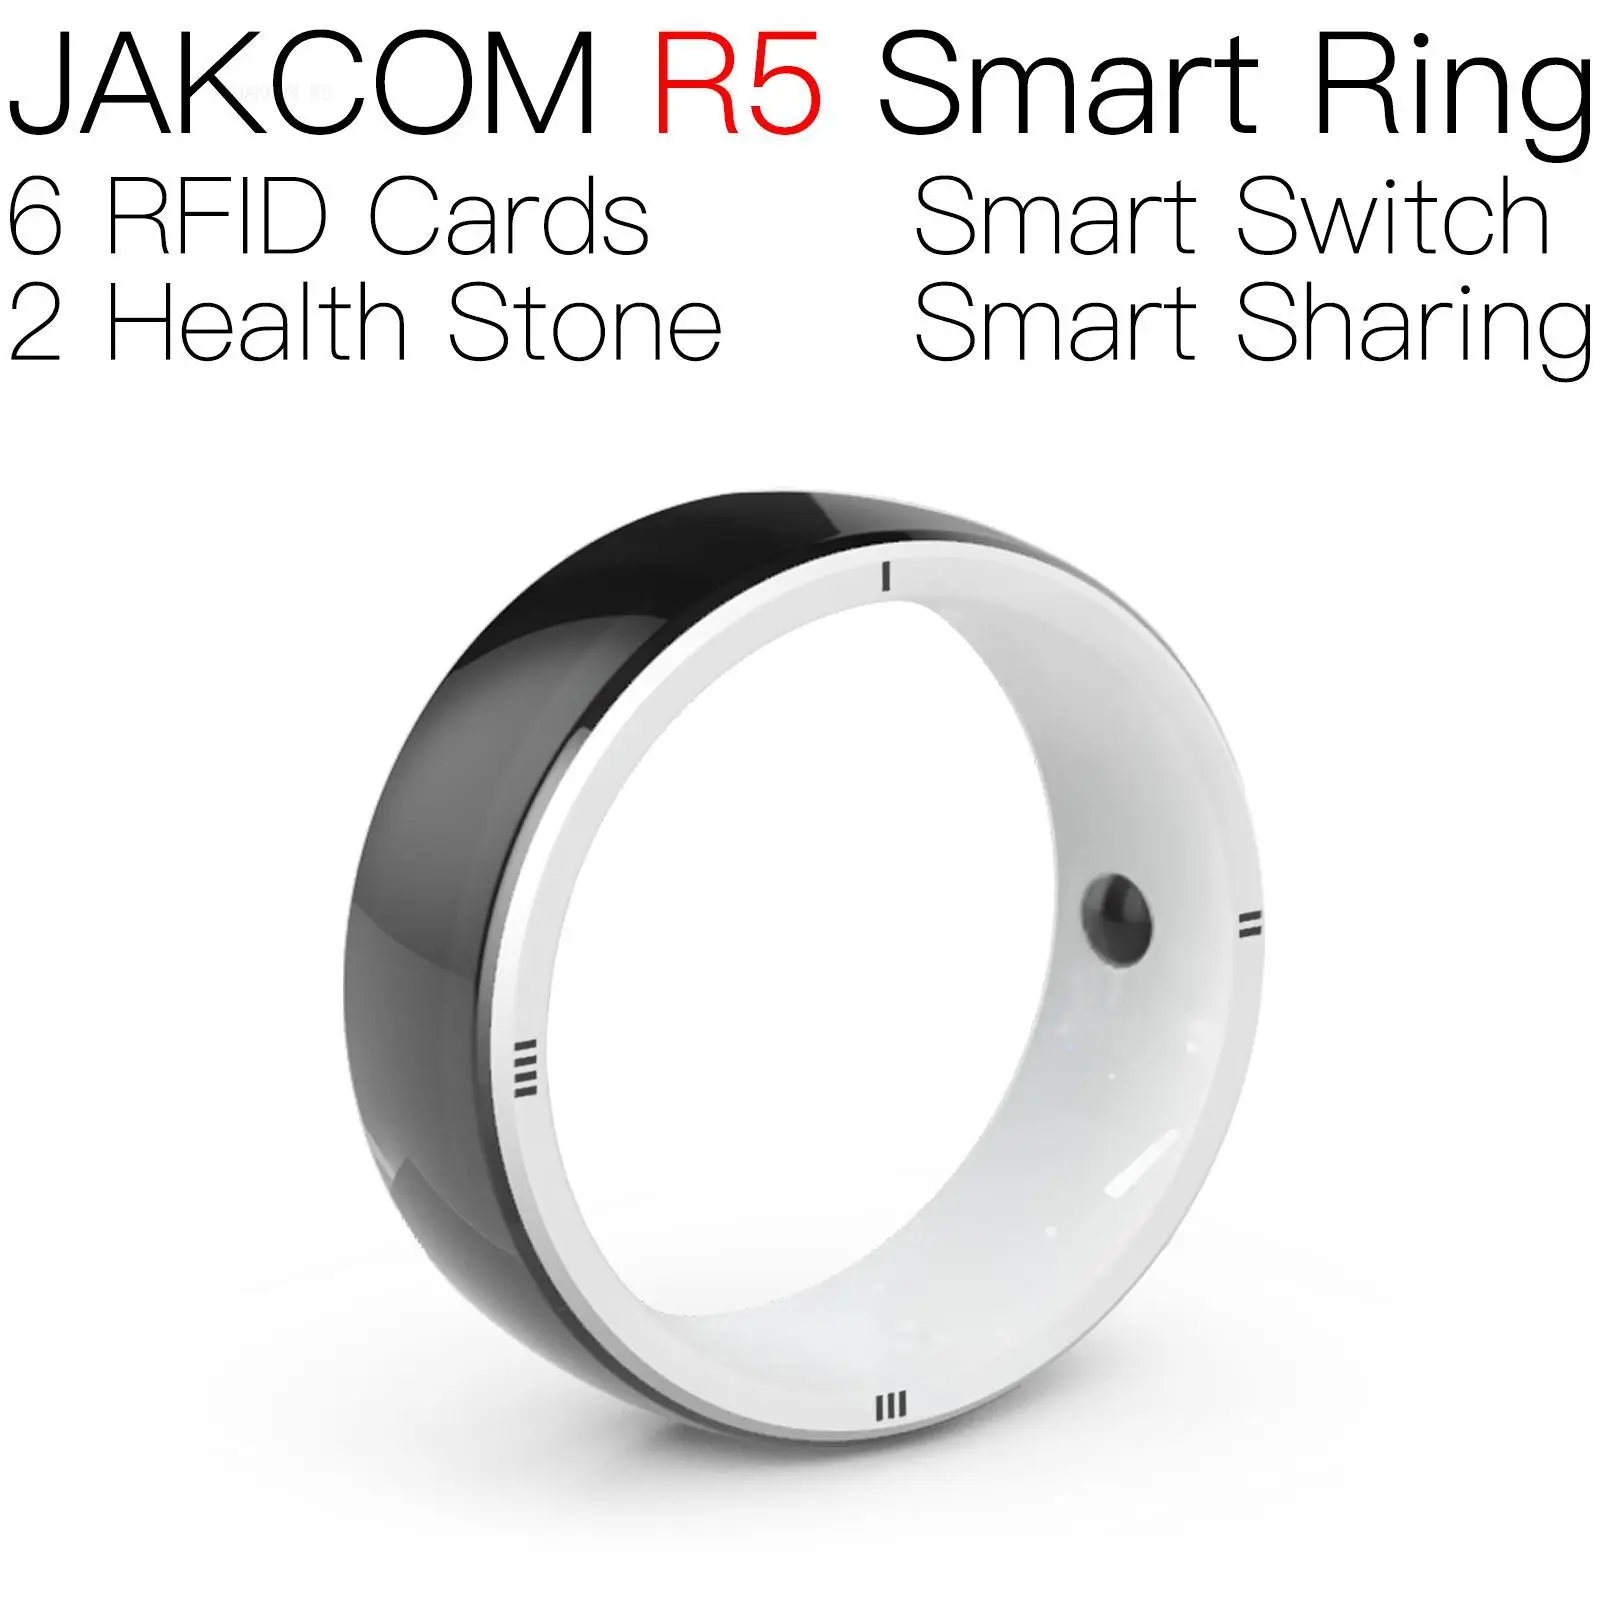 

JAKCOM R5 Smart Ring Match to ugreen official store offical gadgets woman watch band shoes for men 13 max